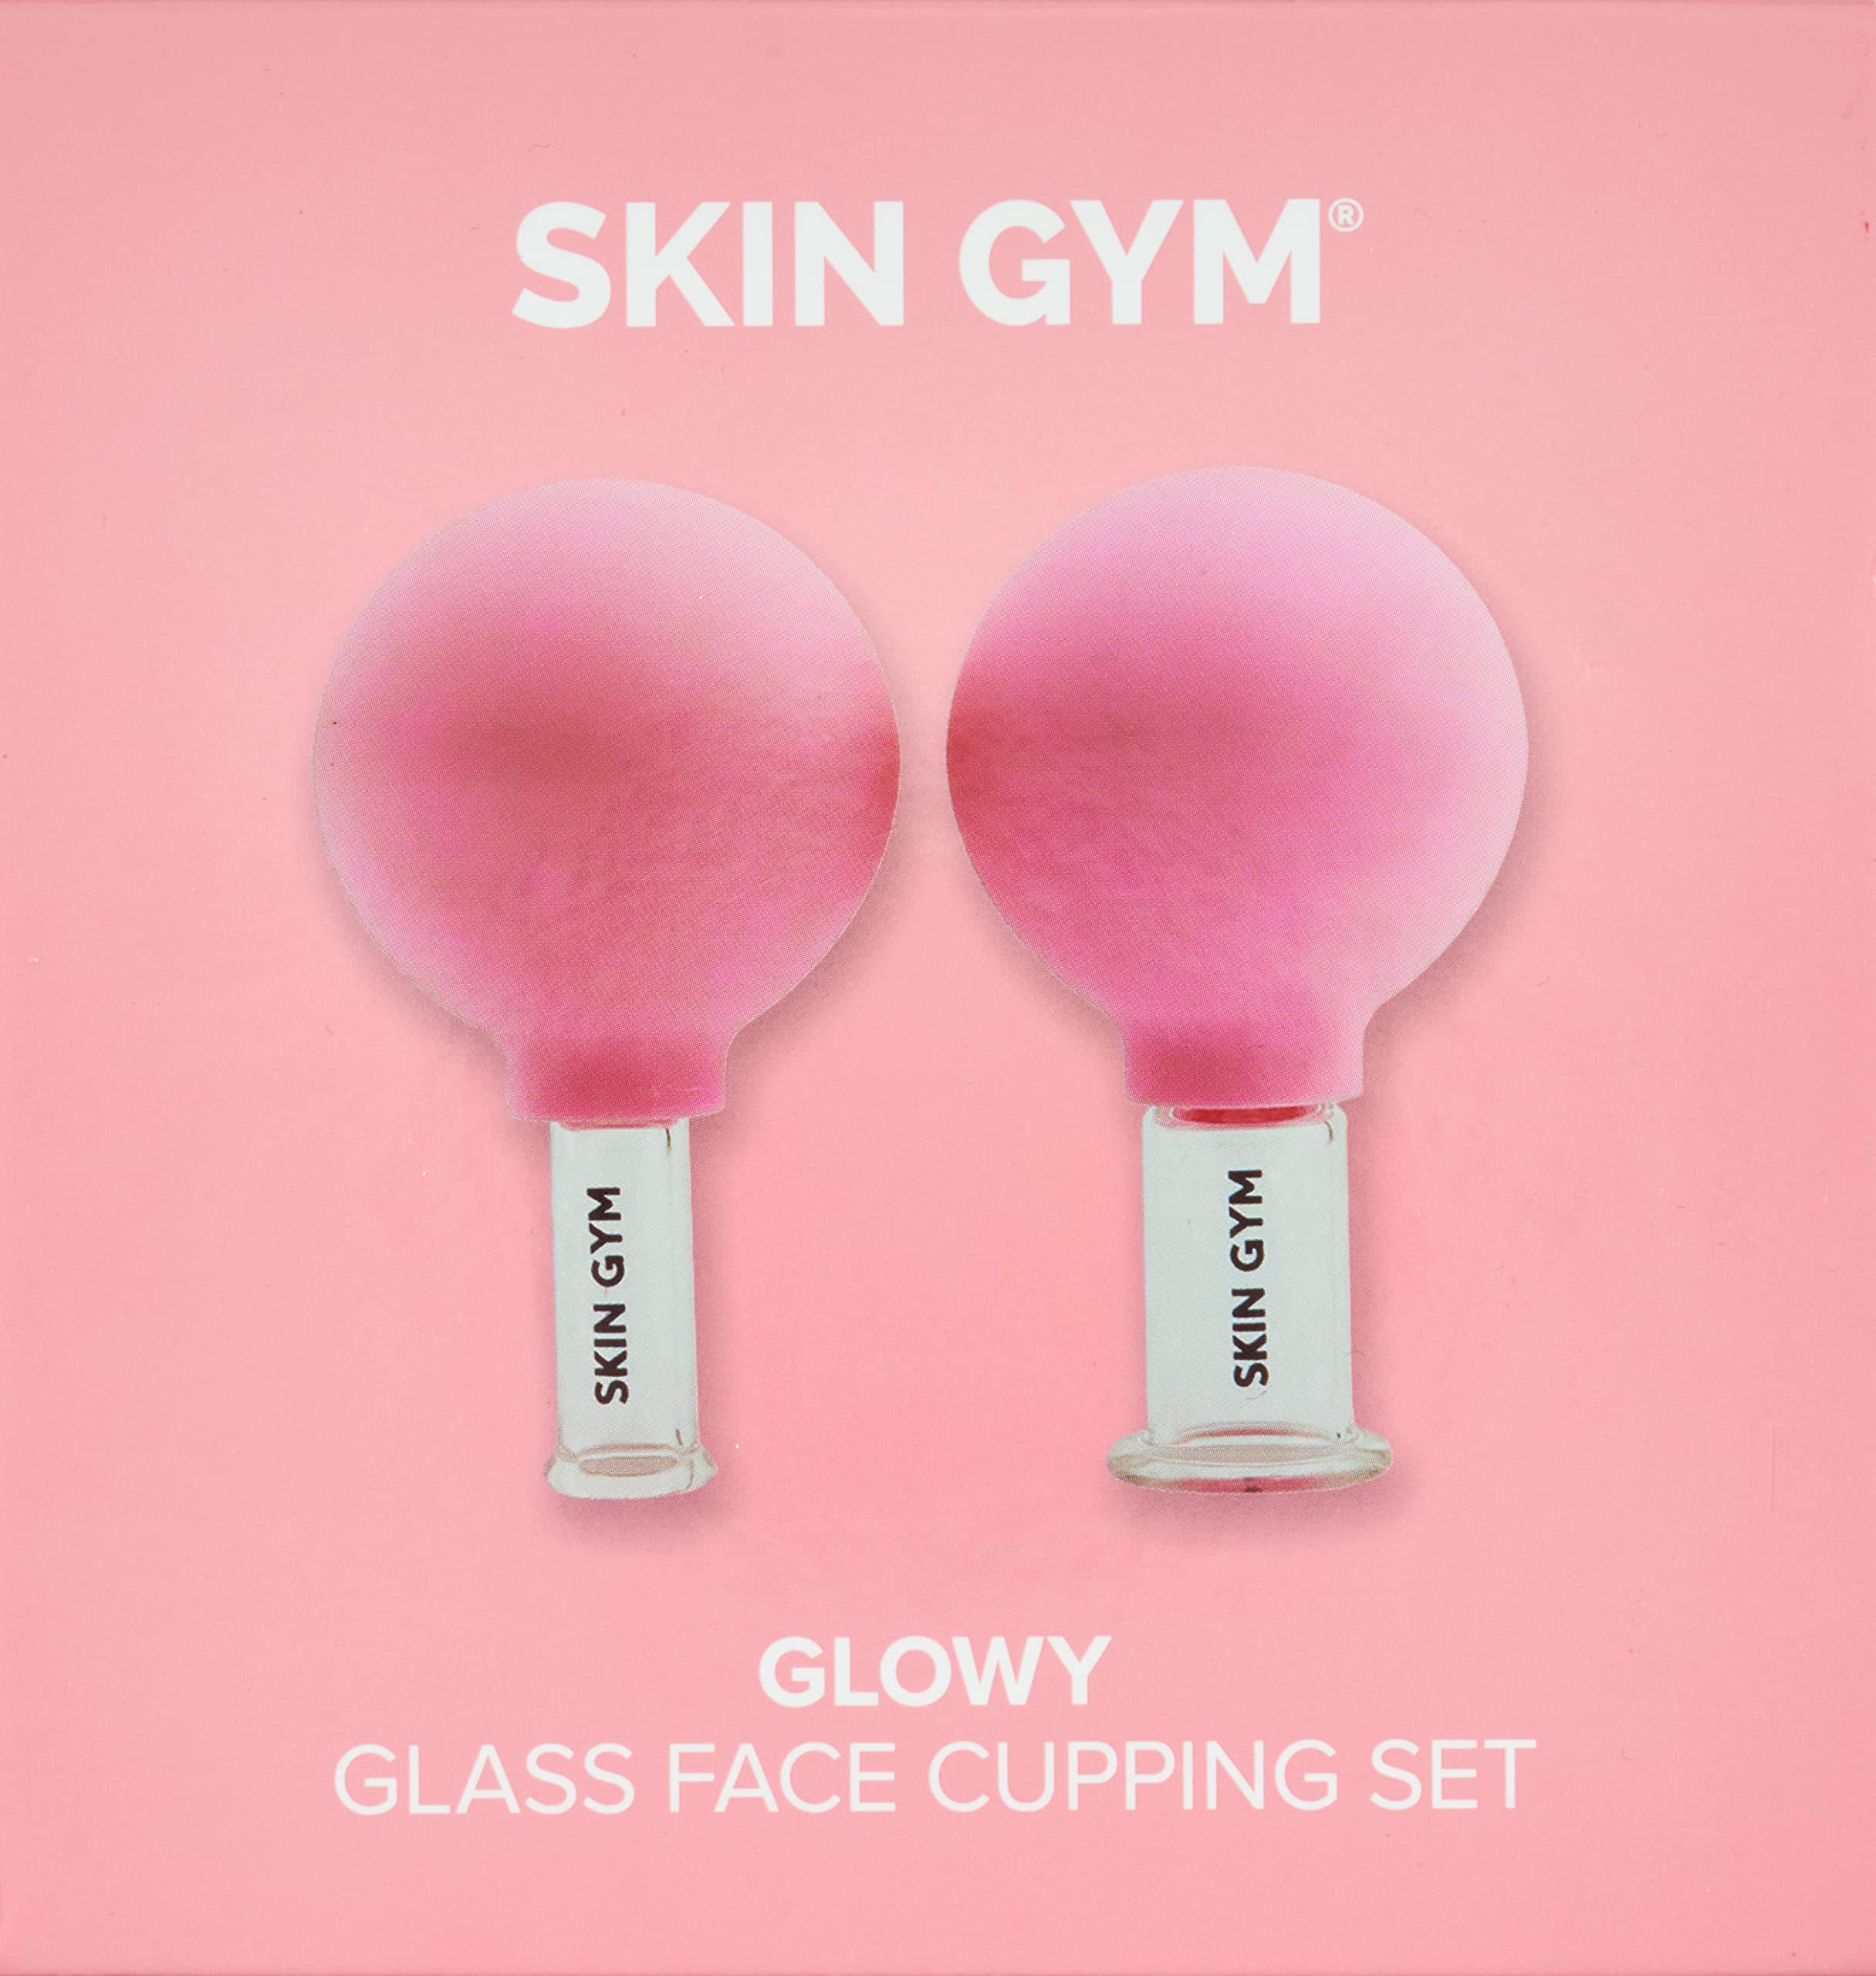 Skin Gym Glass Facial Cupping Set for Reducing Cellulite and Wrinkles, Vacuum Massage Therapy for Toning Chin, Jawline, Neck, and Décolletage, Kit Includes 2 Face Suction Cups